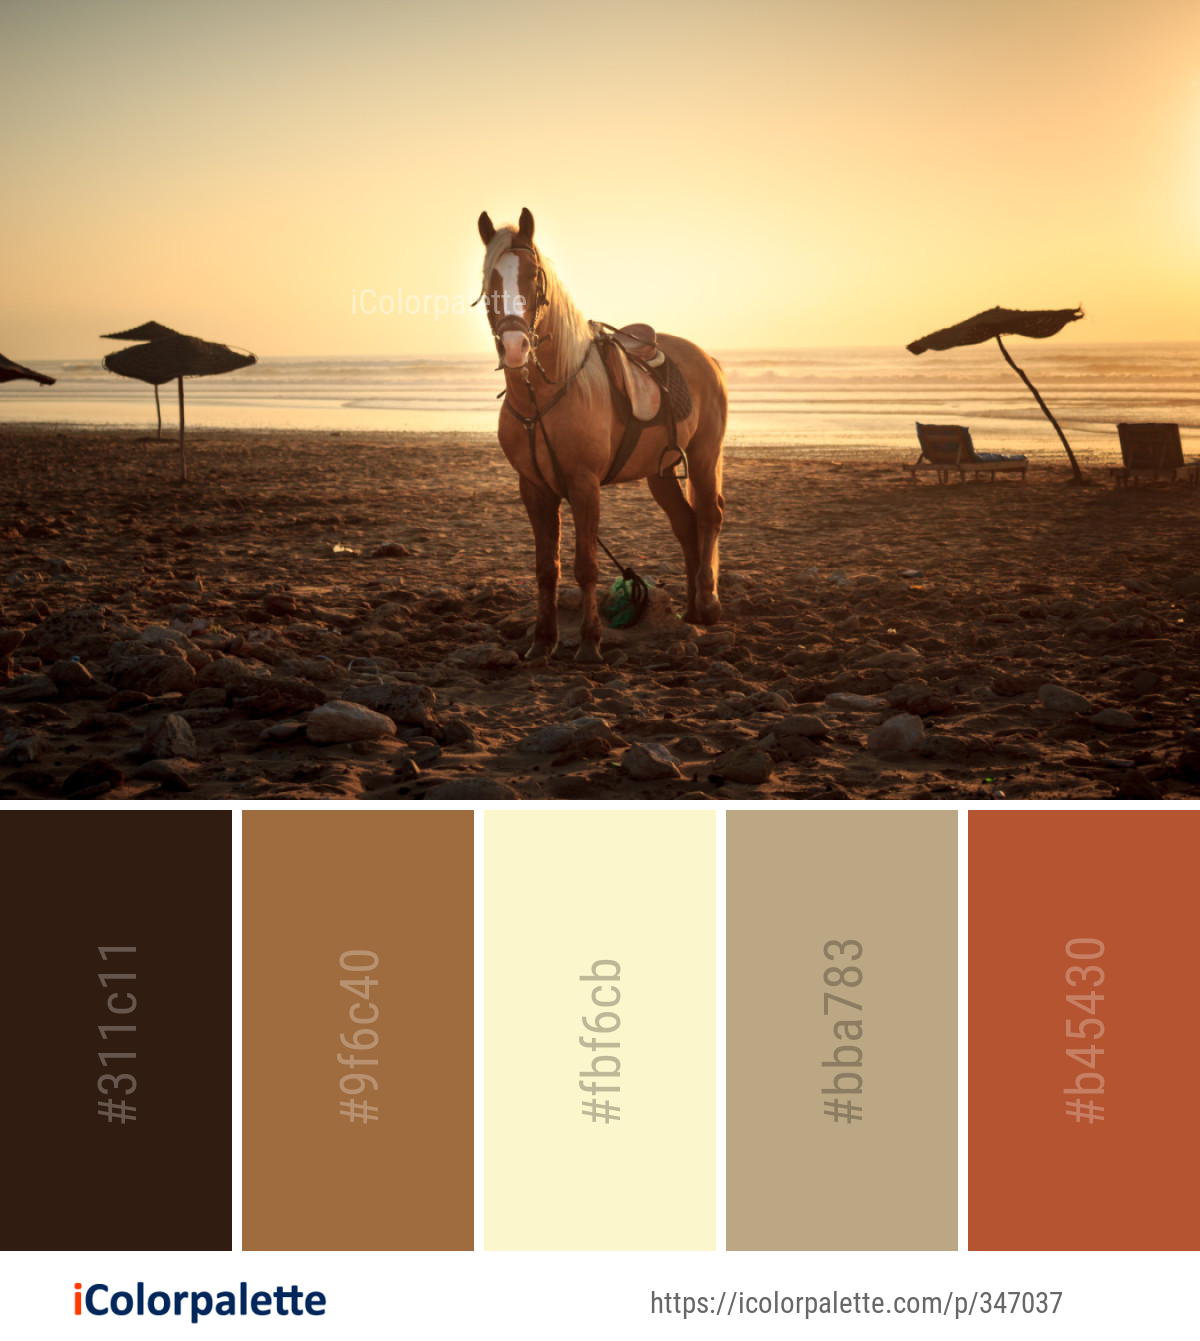 Color Palette Ideas from Horse Sky Like Mammal Image